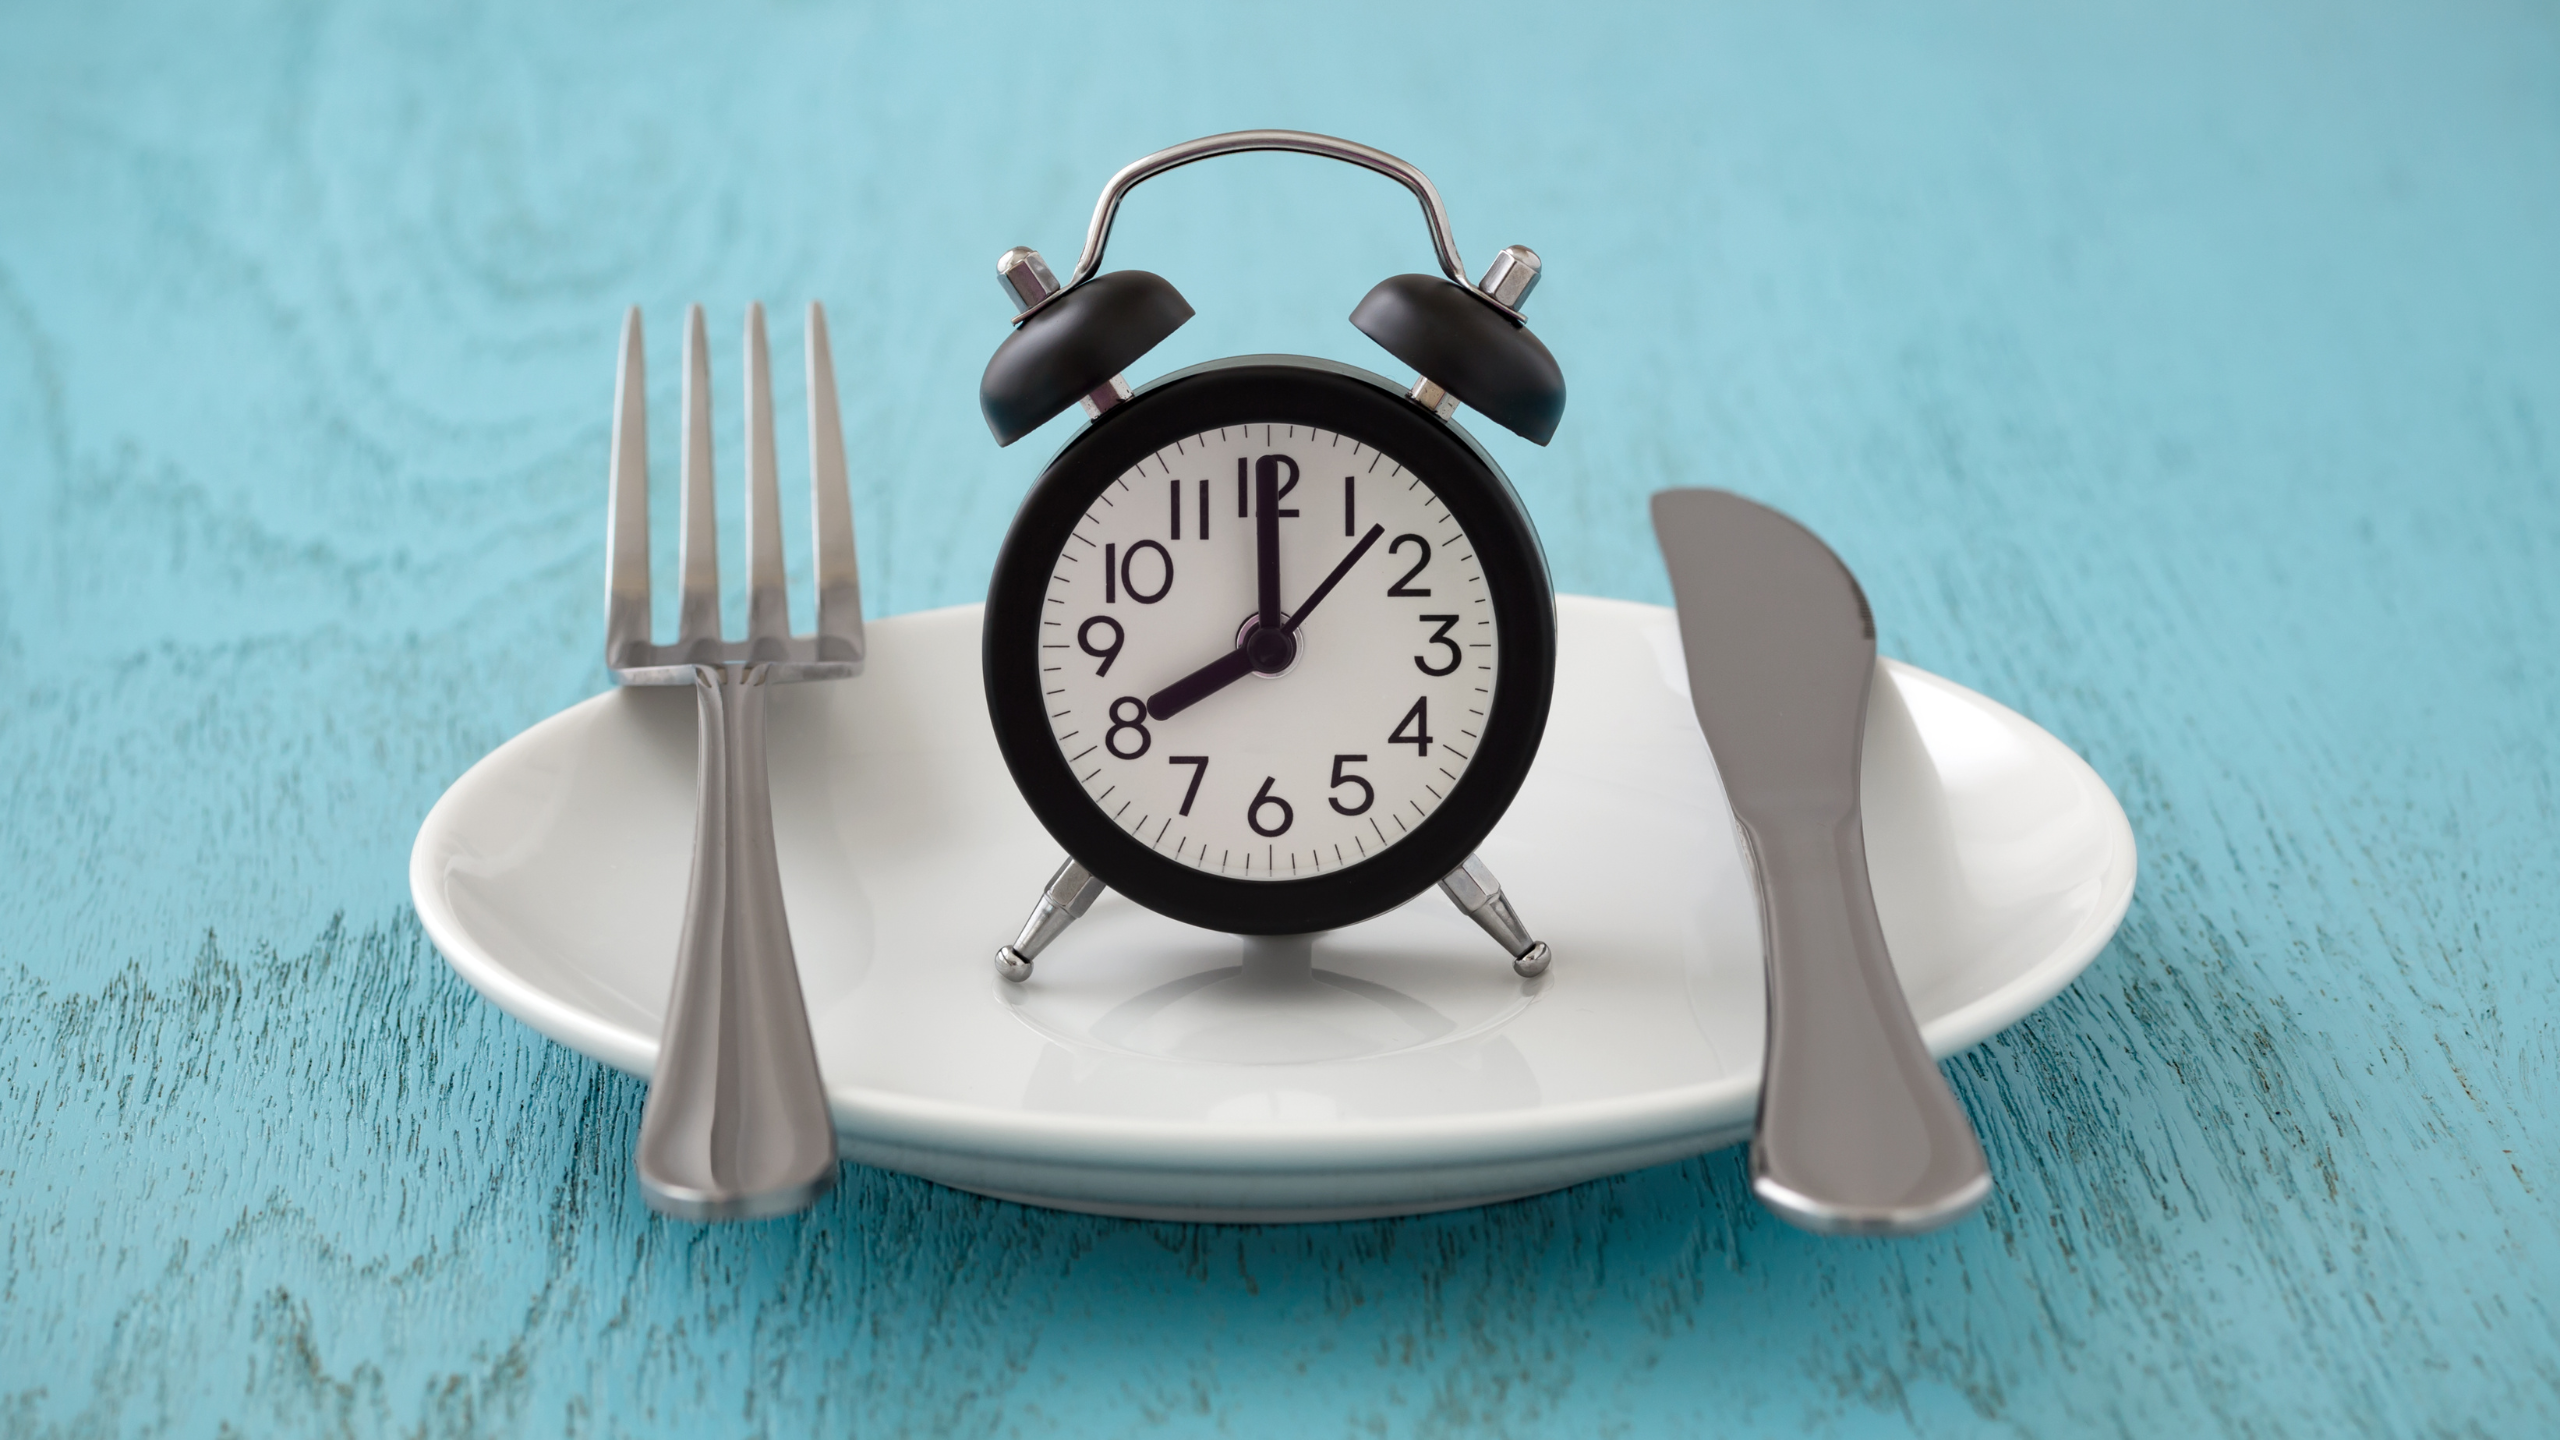 Image of a plate with a fork, knife, and alarm clock but no food on it representing fasting.